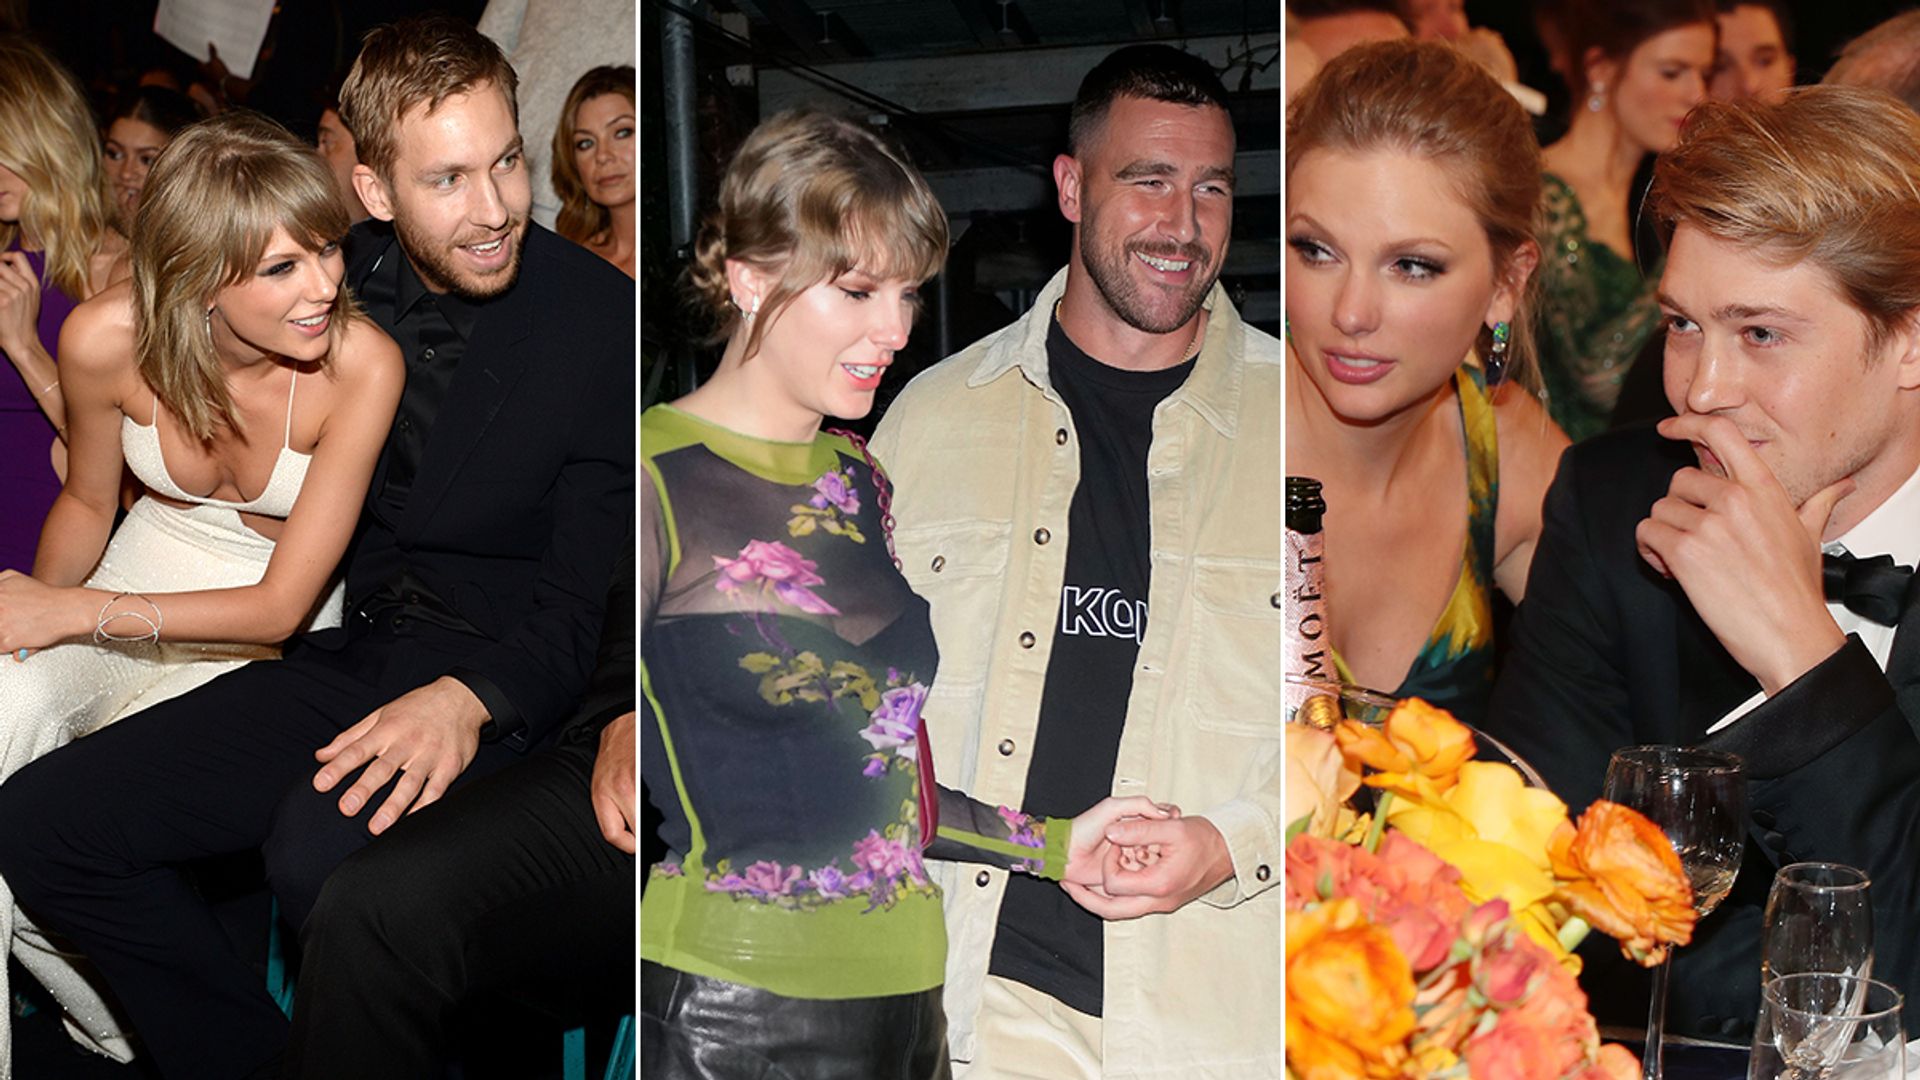 Taylor Swift's very public dating history: a timeline of her famous partners